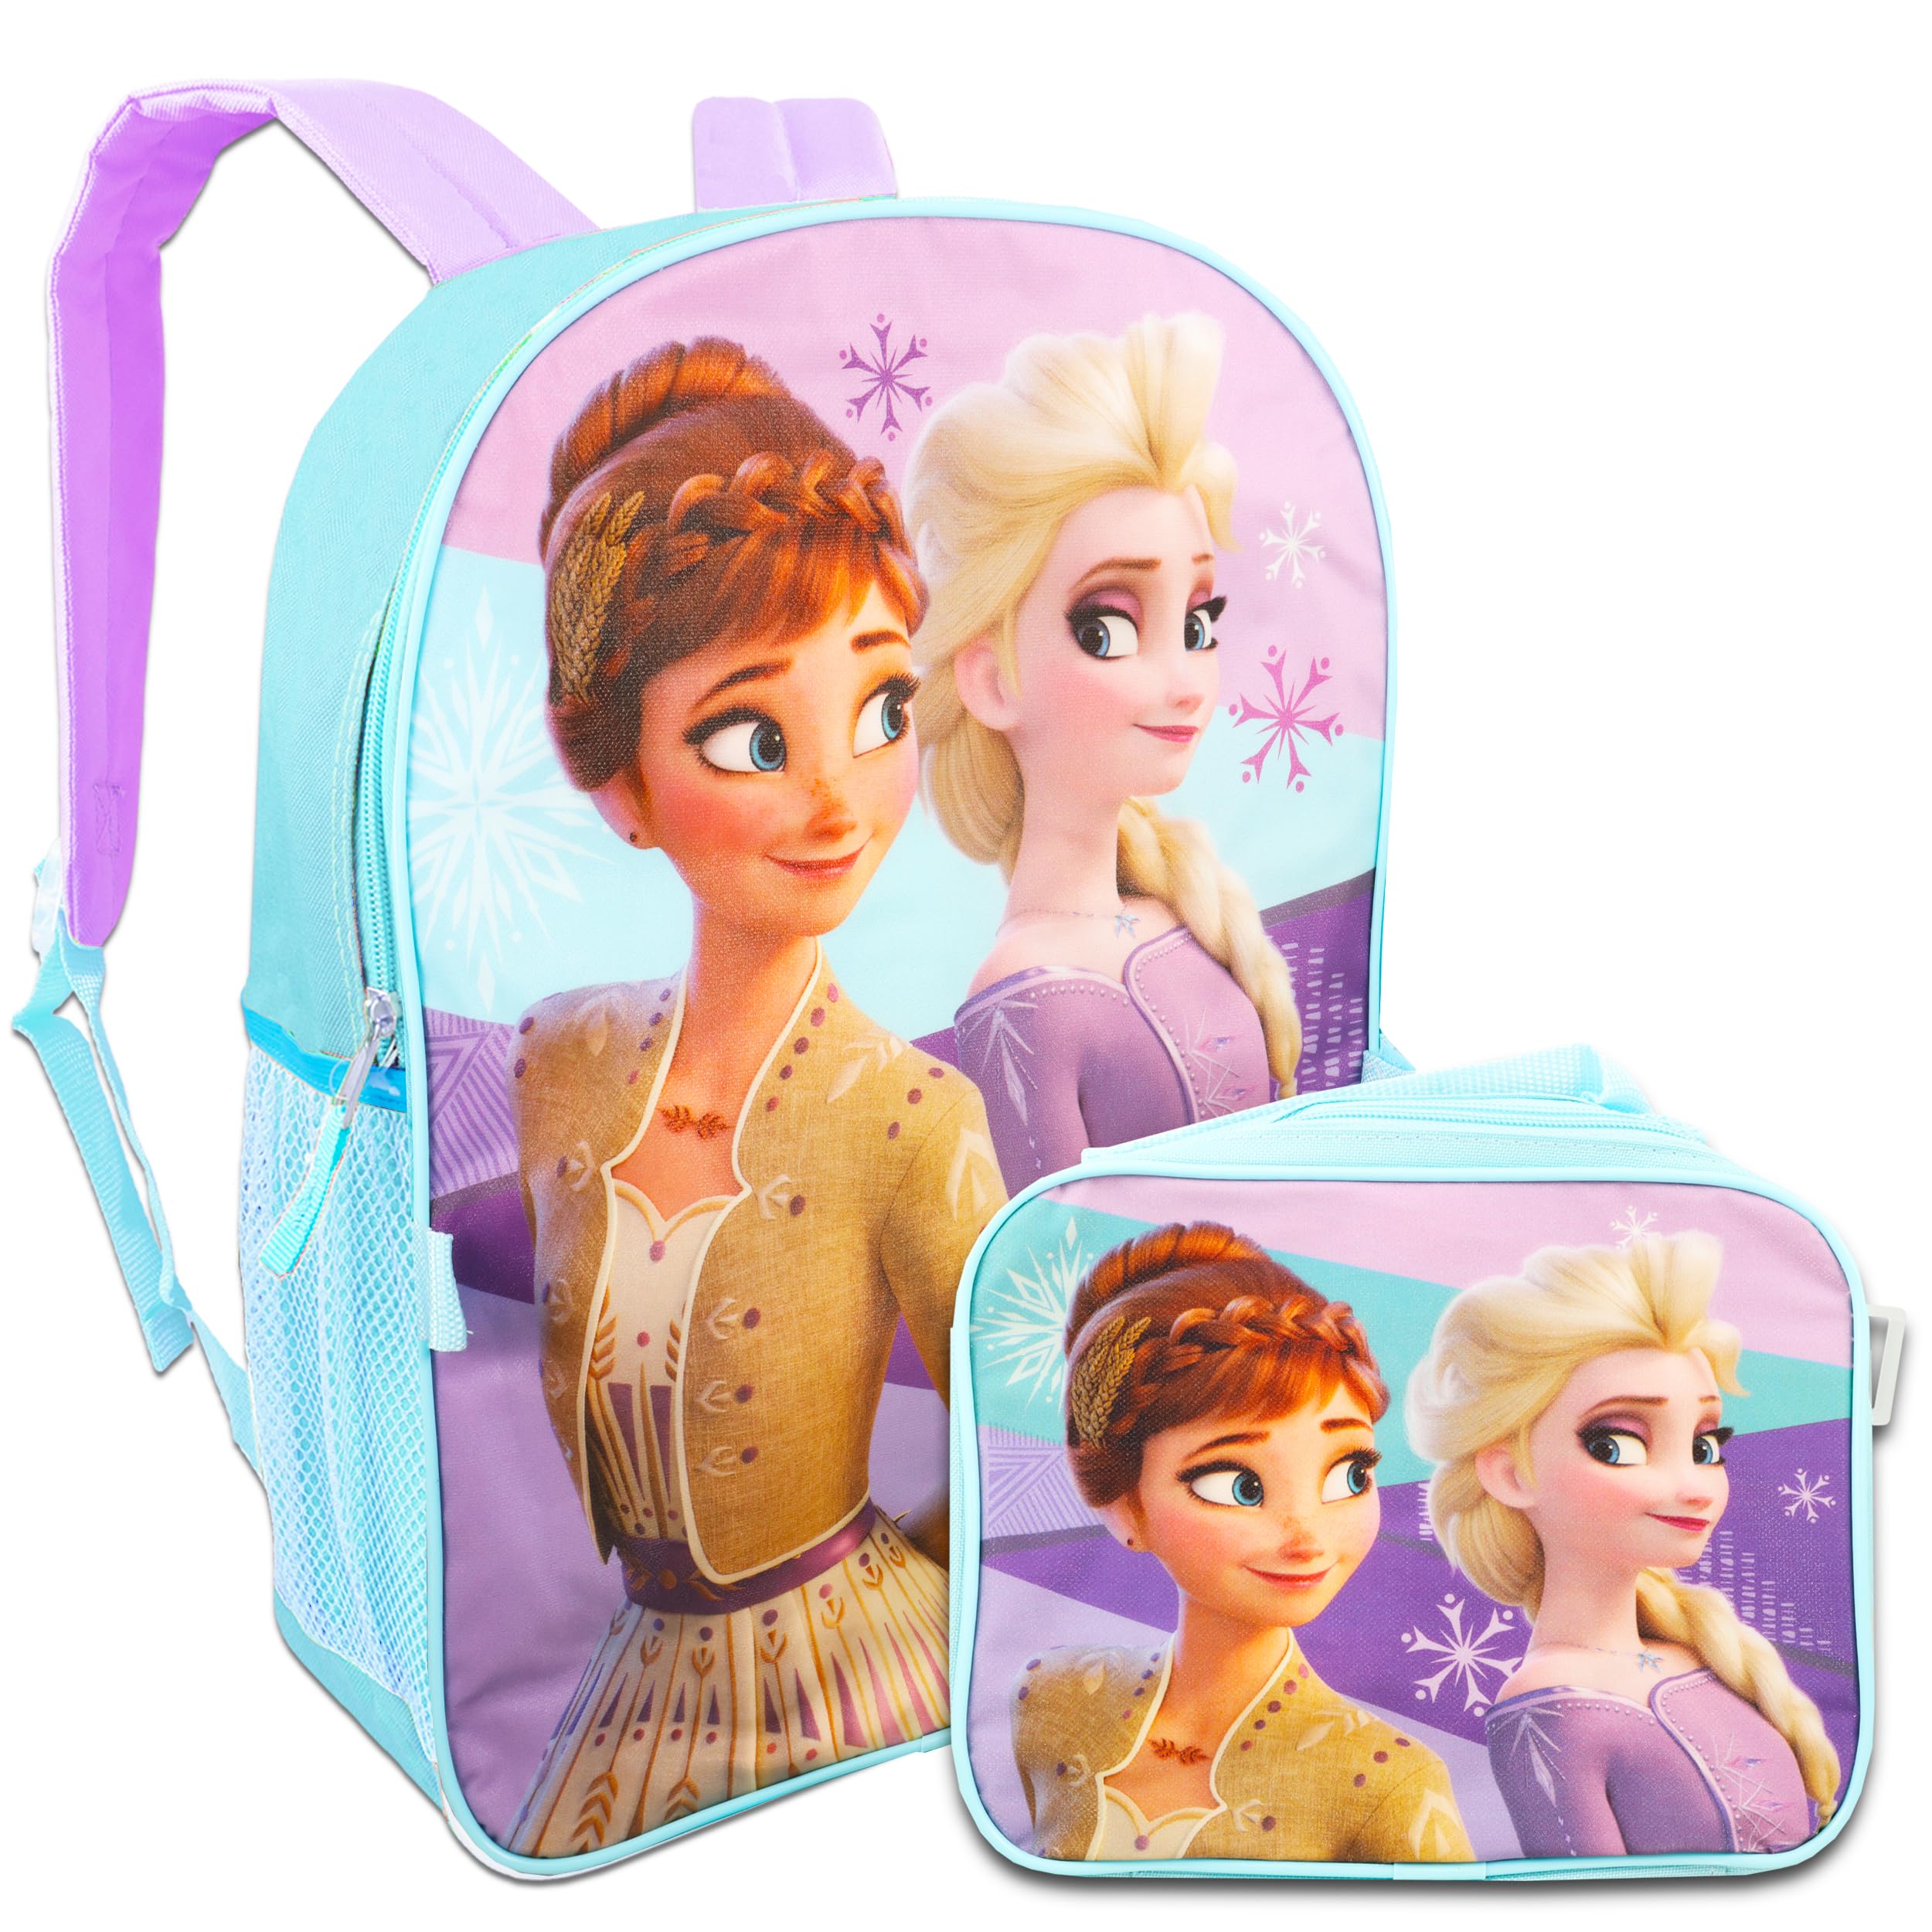 Disney Frozen Backpack with Lunch Box Set - Bundle with Backpack, Lunch Bag, Water Bottle, School Supplies, More for Girls